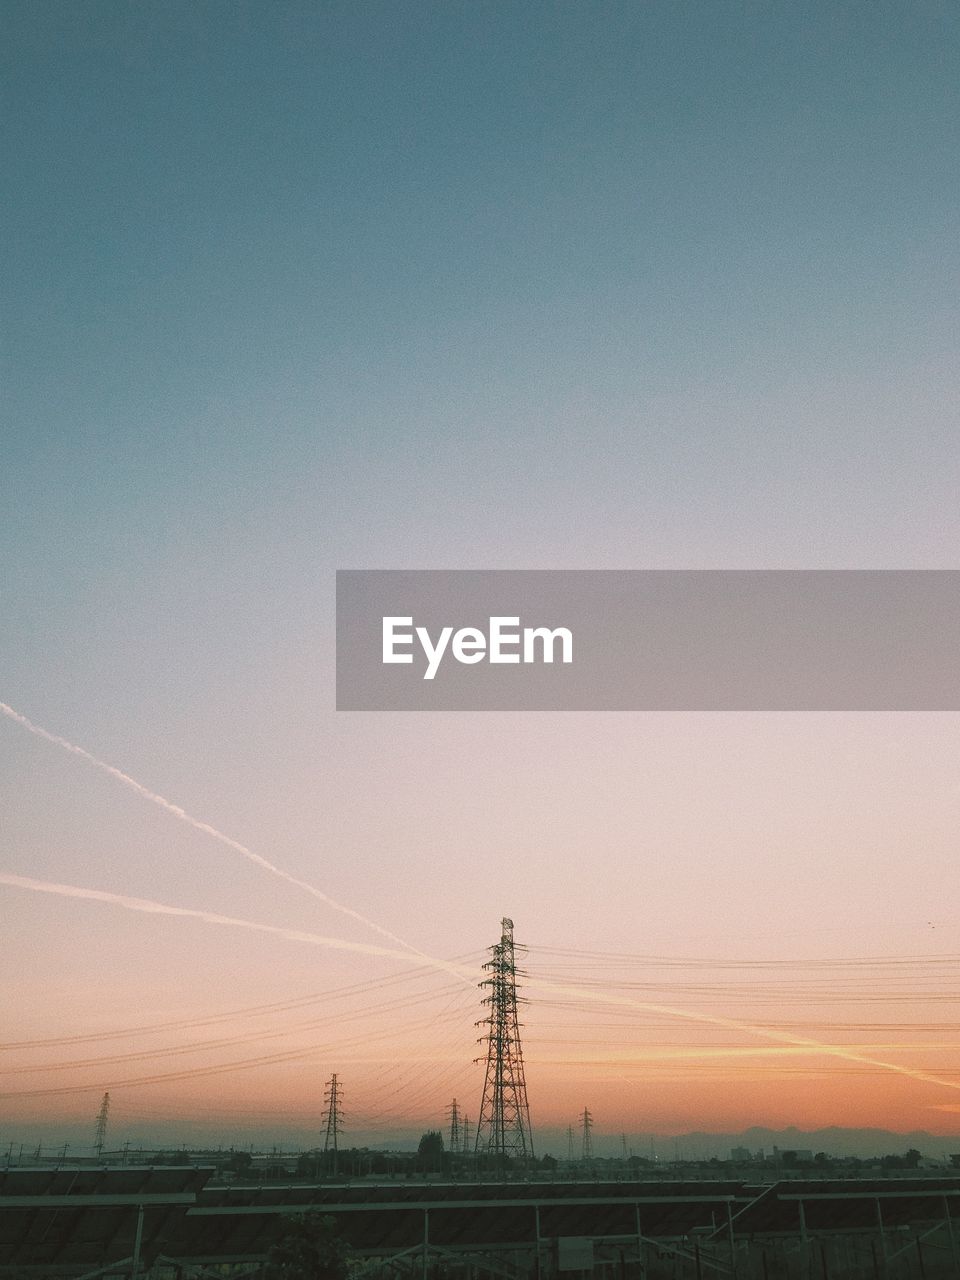 ELECTRICITY PYLON ON LAND AGAINST SKY DURING SUNSET